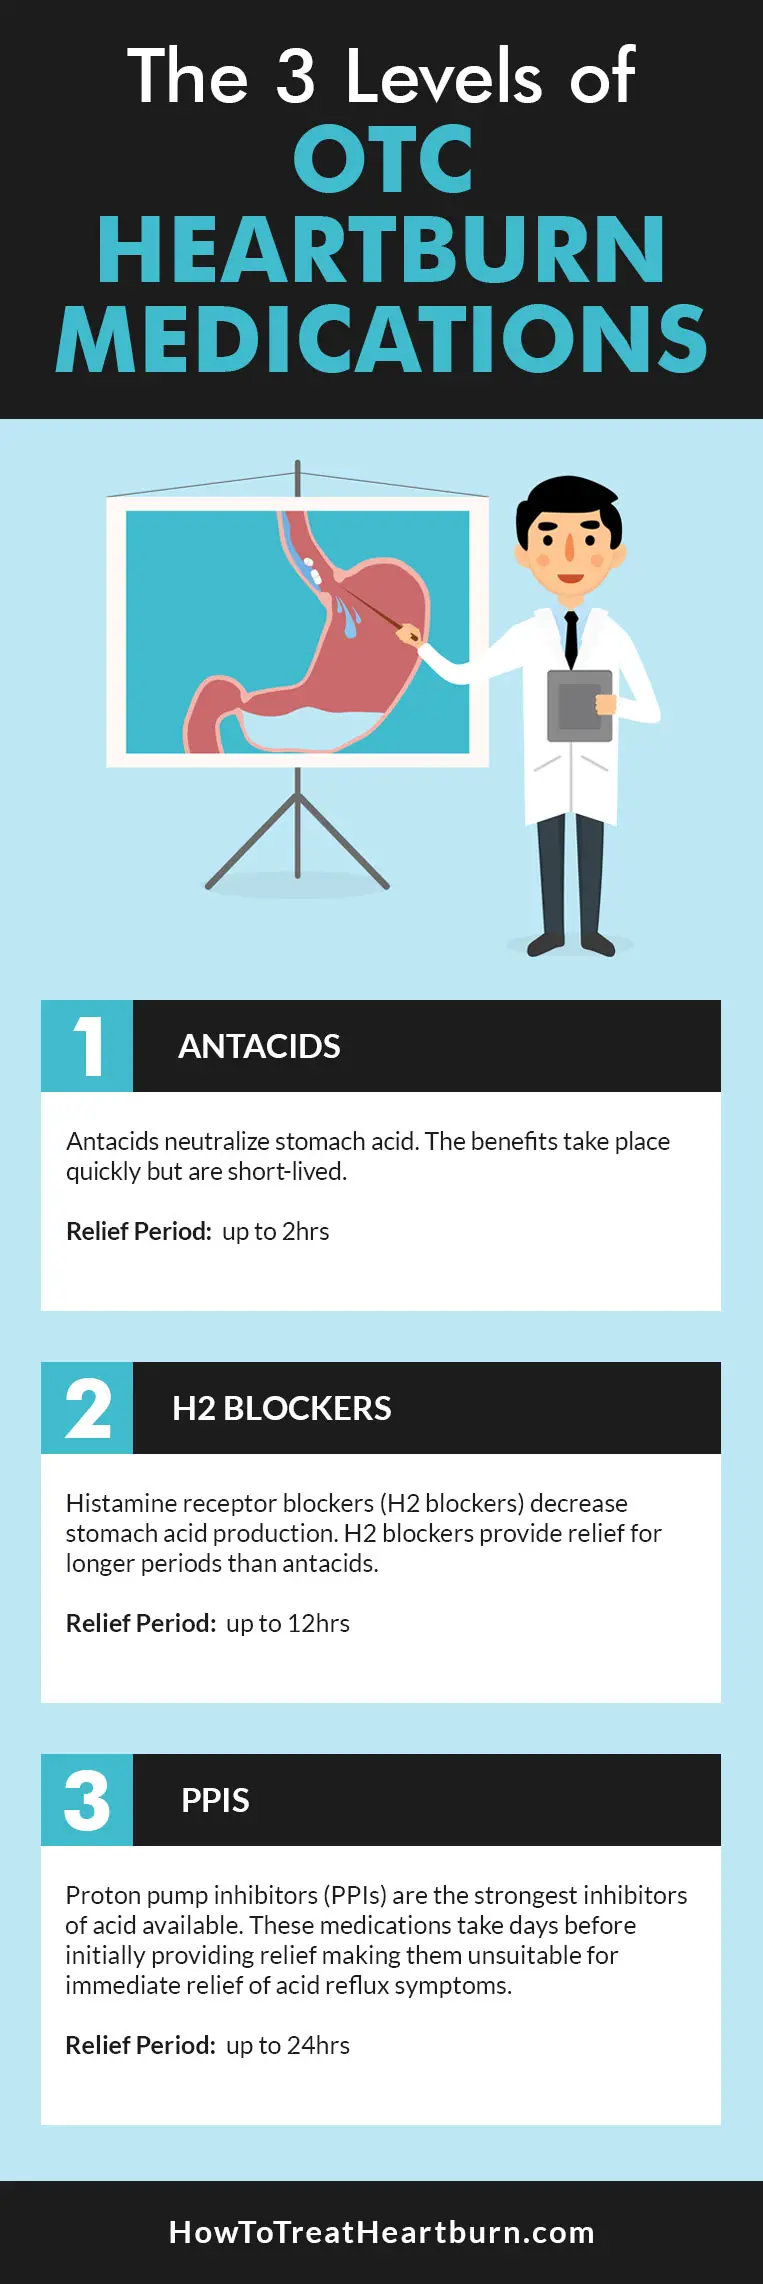 There are 3 levels of OTC medications for treating heartburn and acid reflux: antacids, histamine receptor blockers (H2 blockers), and Proton Pump Inhibitors (PPI's).